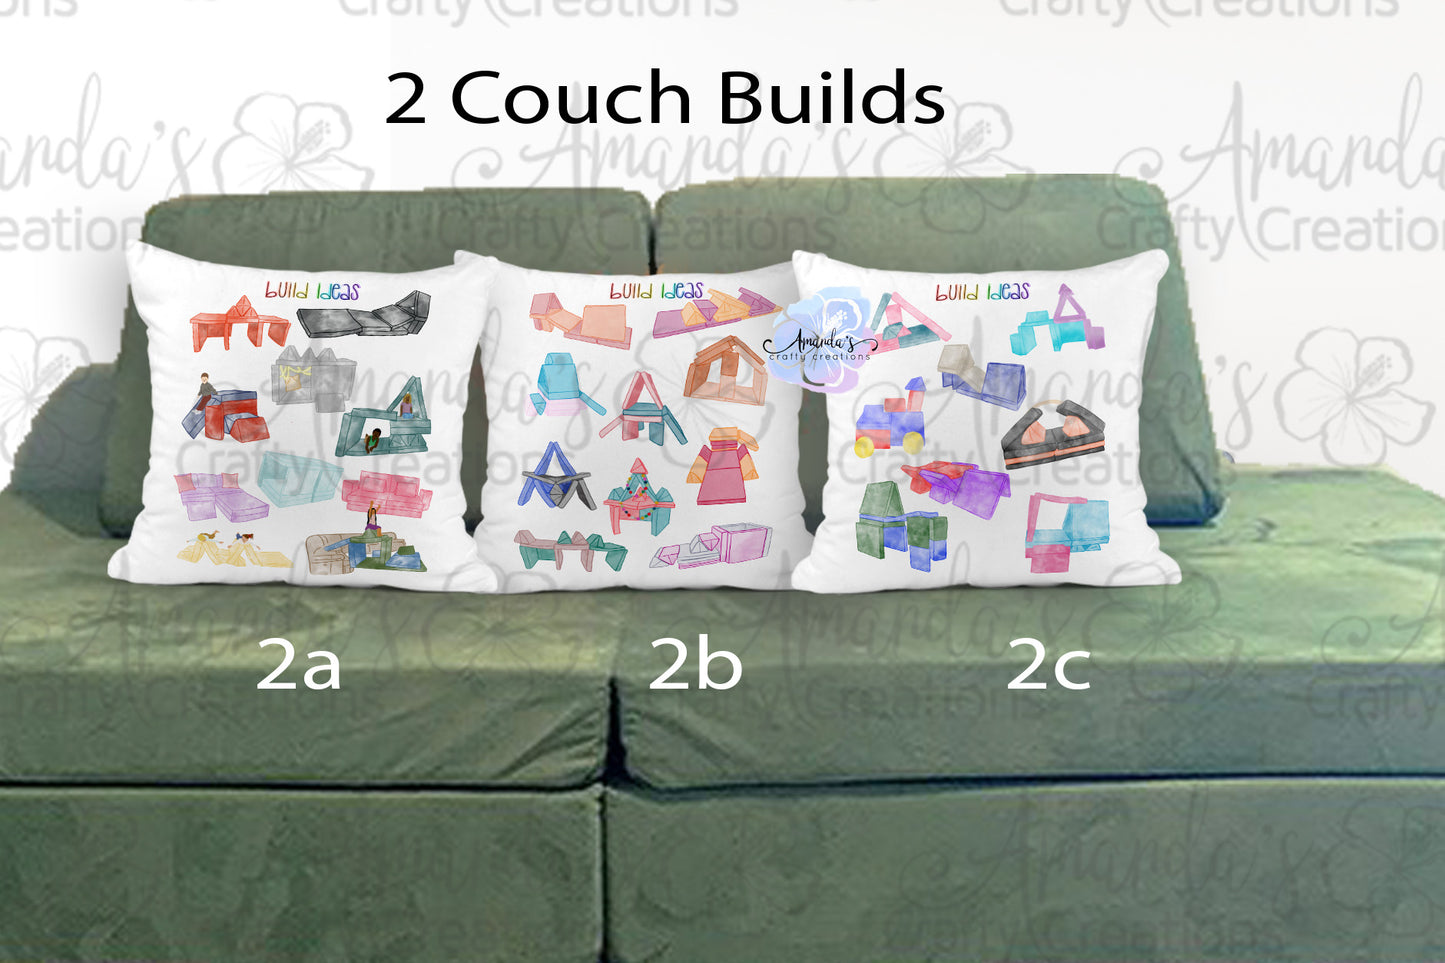 Customizable Play Couch configuration pillow case, watercolor image, play couch uses, pillow case for play room, playroom decor